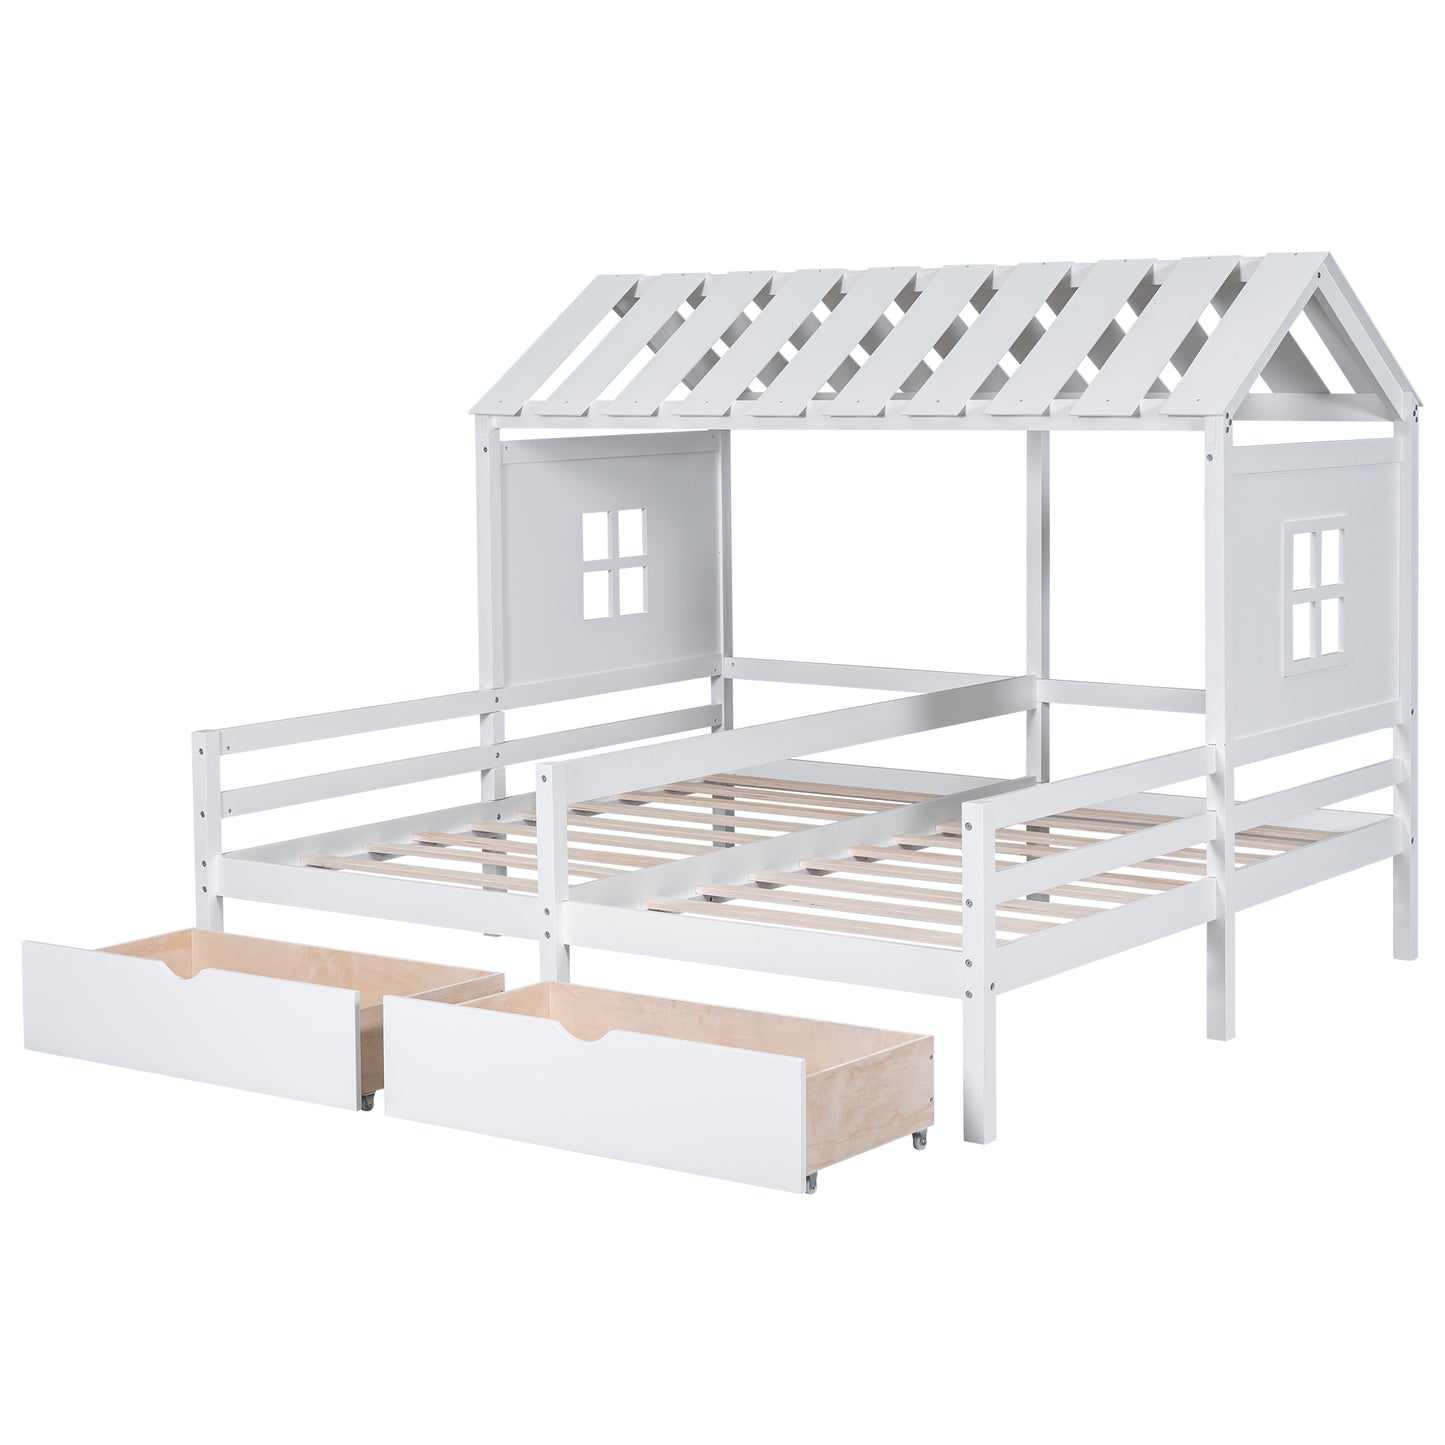 Twin Size House Platform Beds with Two Drawers for Boy and Girl Shared Beds, Combination of 2 Side by Side Twin Size Beds, White